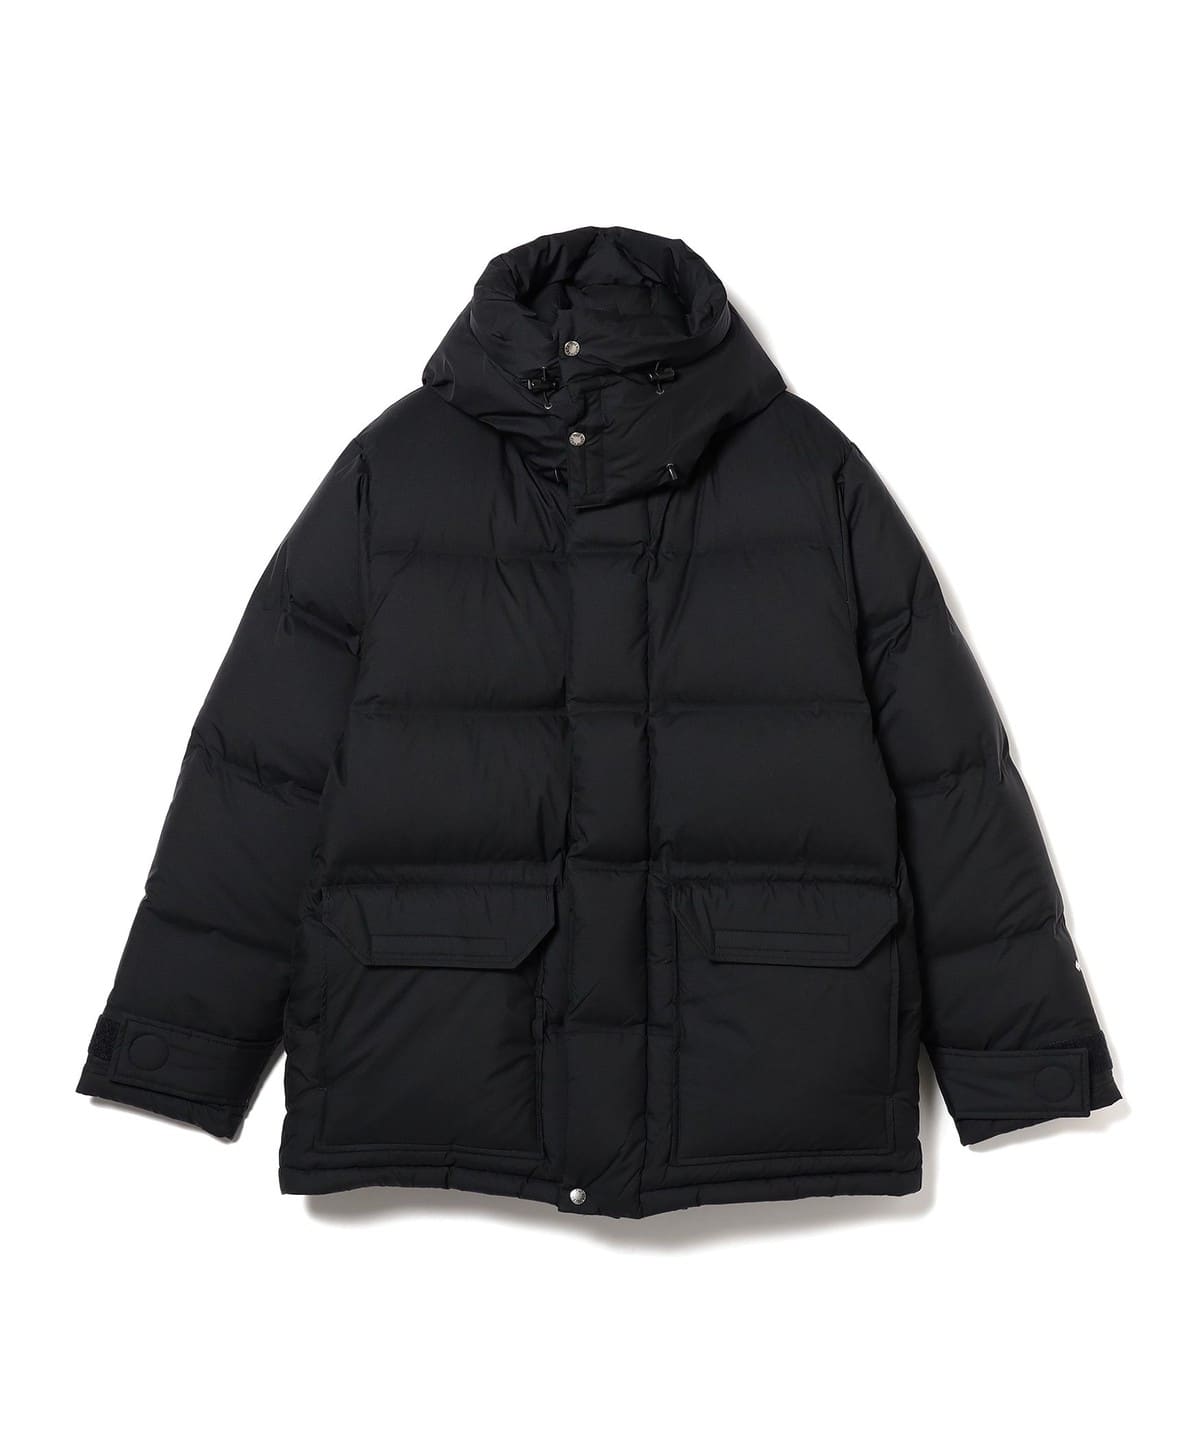 B:MING by BEAMS B:MING by BEAMS THE NORTH FACE / Windstopper 